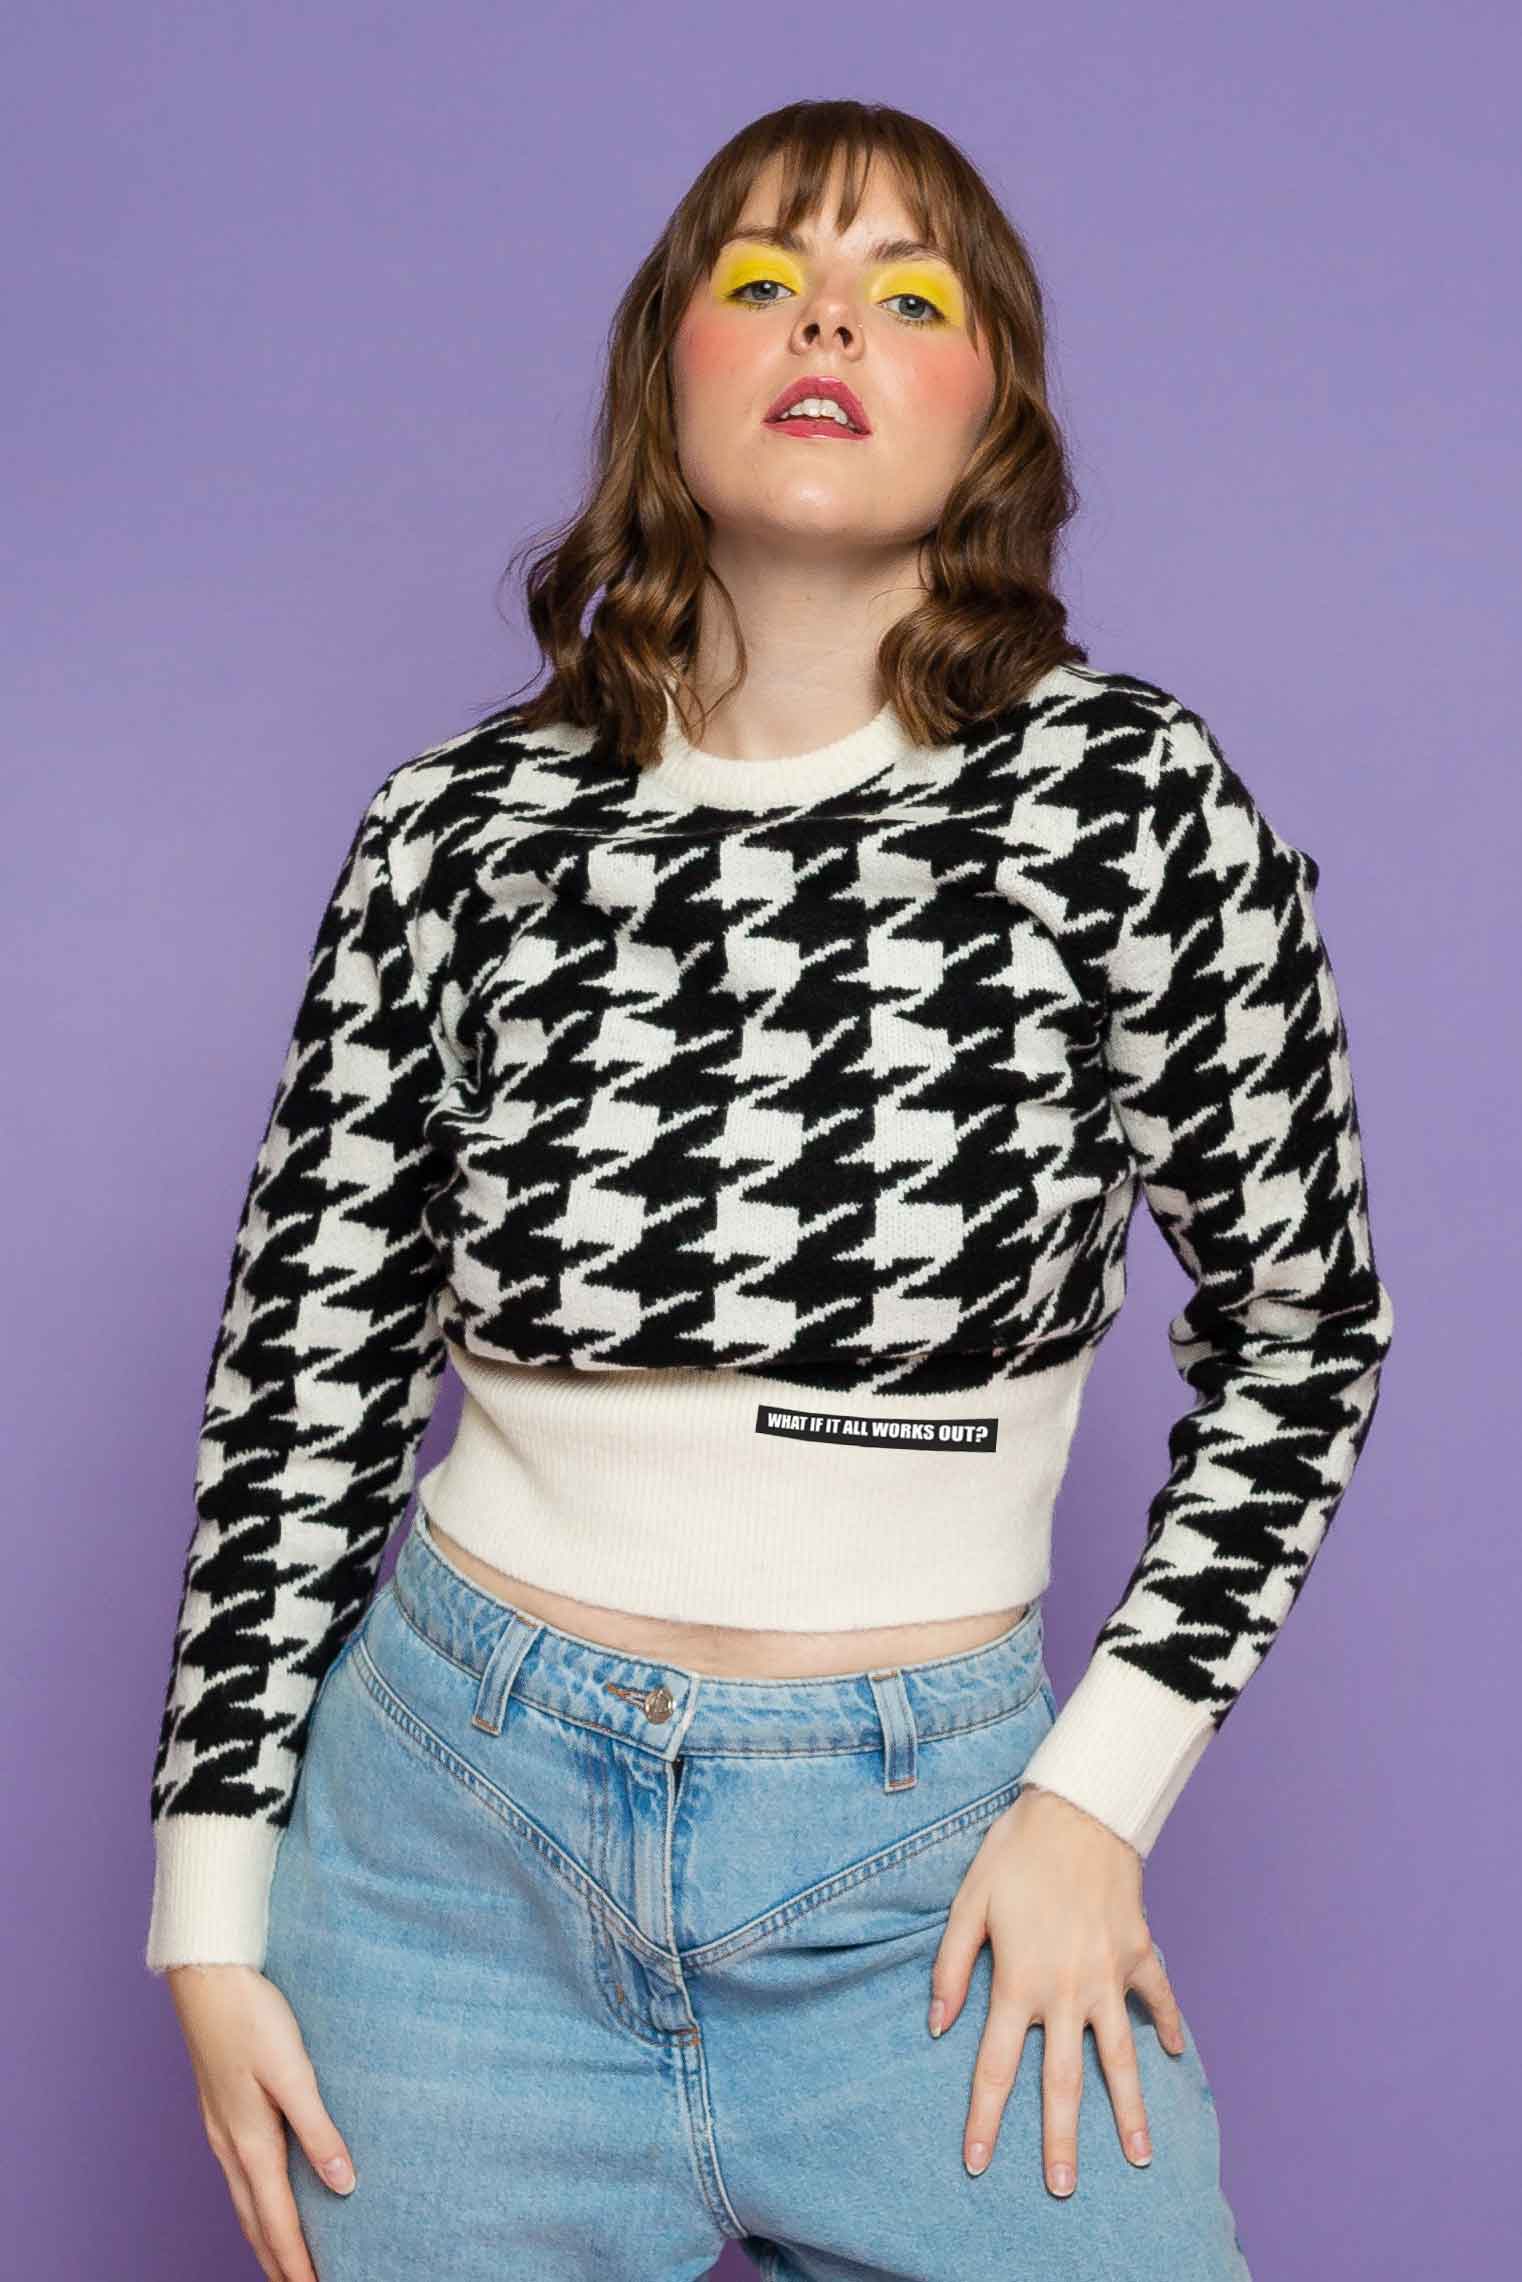 This is The Remix Sweater WHAT IF ALL WORKS OUT? - Chunky Knitted Sweater with Houndstooth Pattern